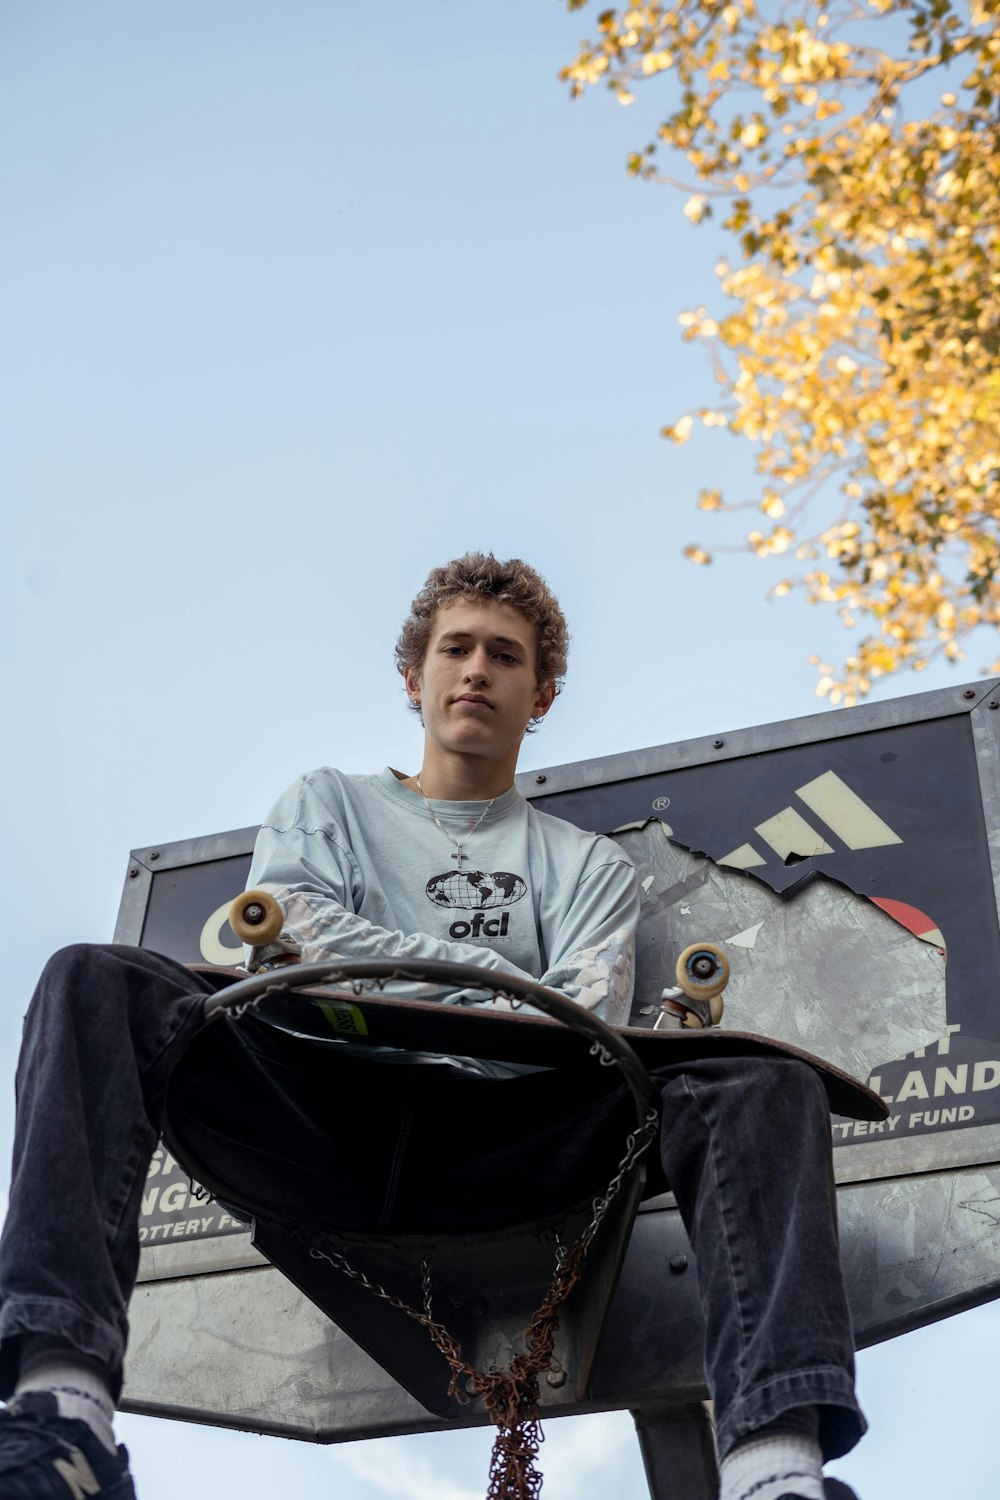 a man sitting on a bench with a skateboard